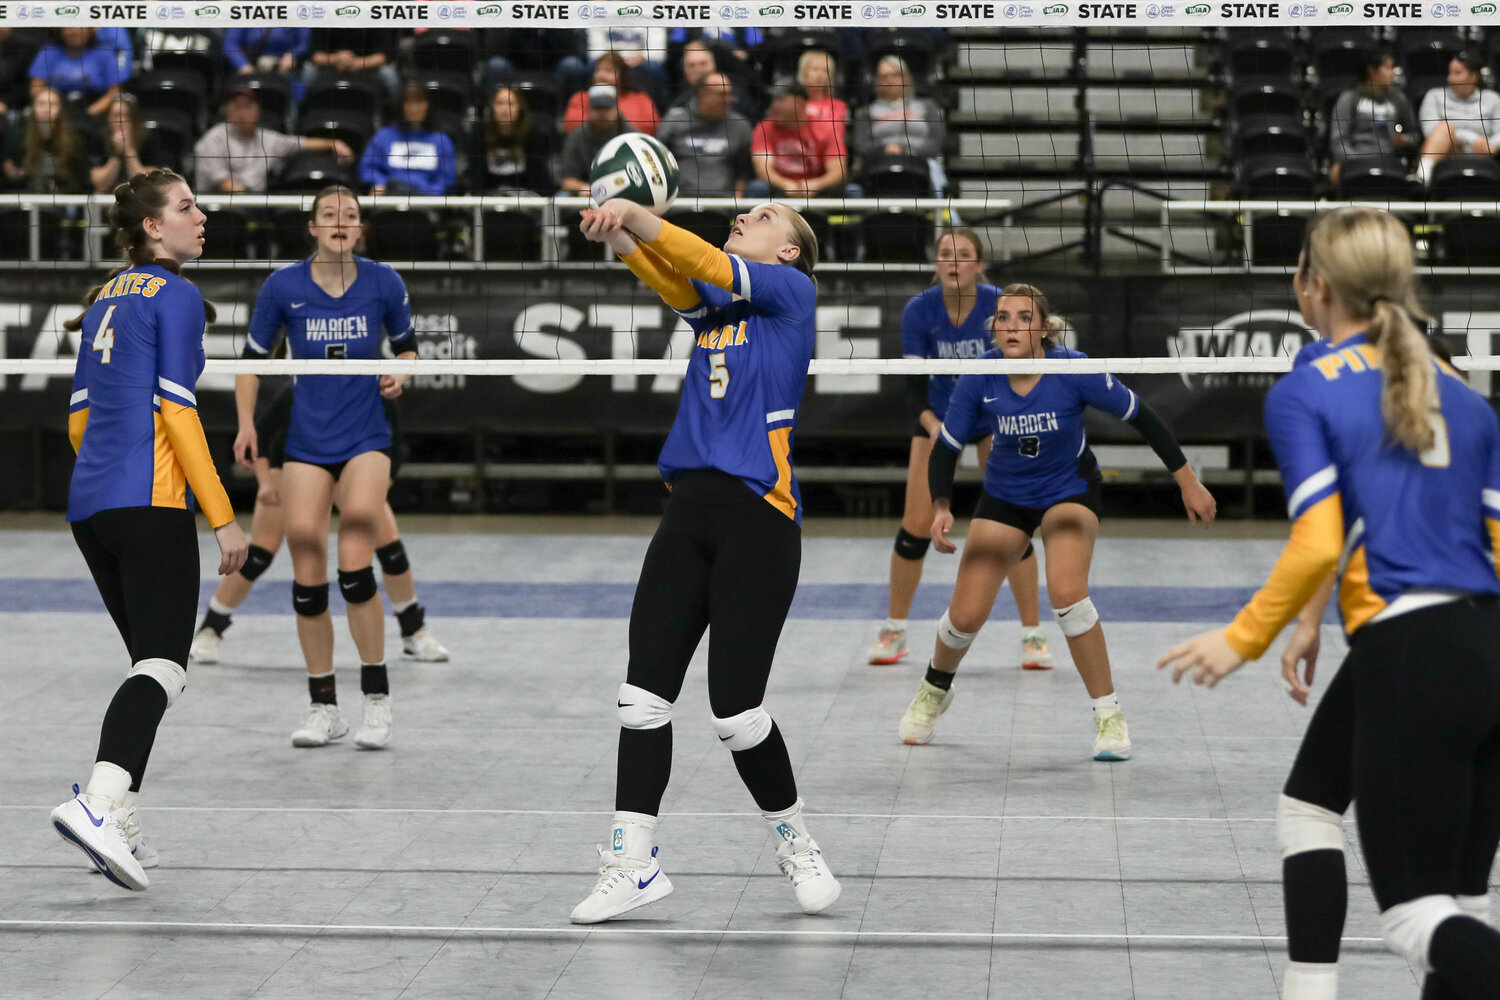 Gaby Guard bumps the ball over the net during Adna's first-round win at the state tournament on Nov. 8 in Yakima.